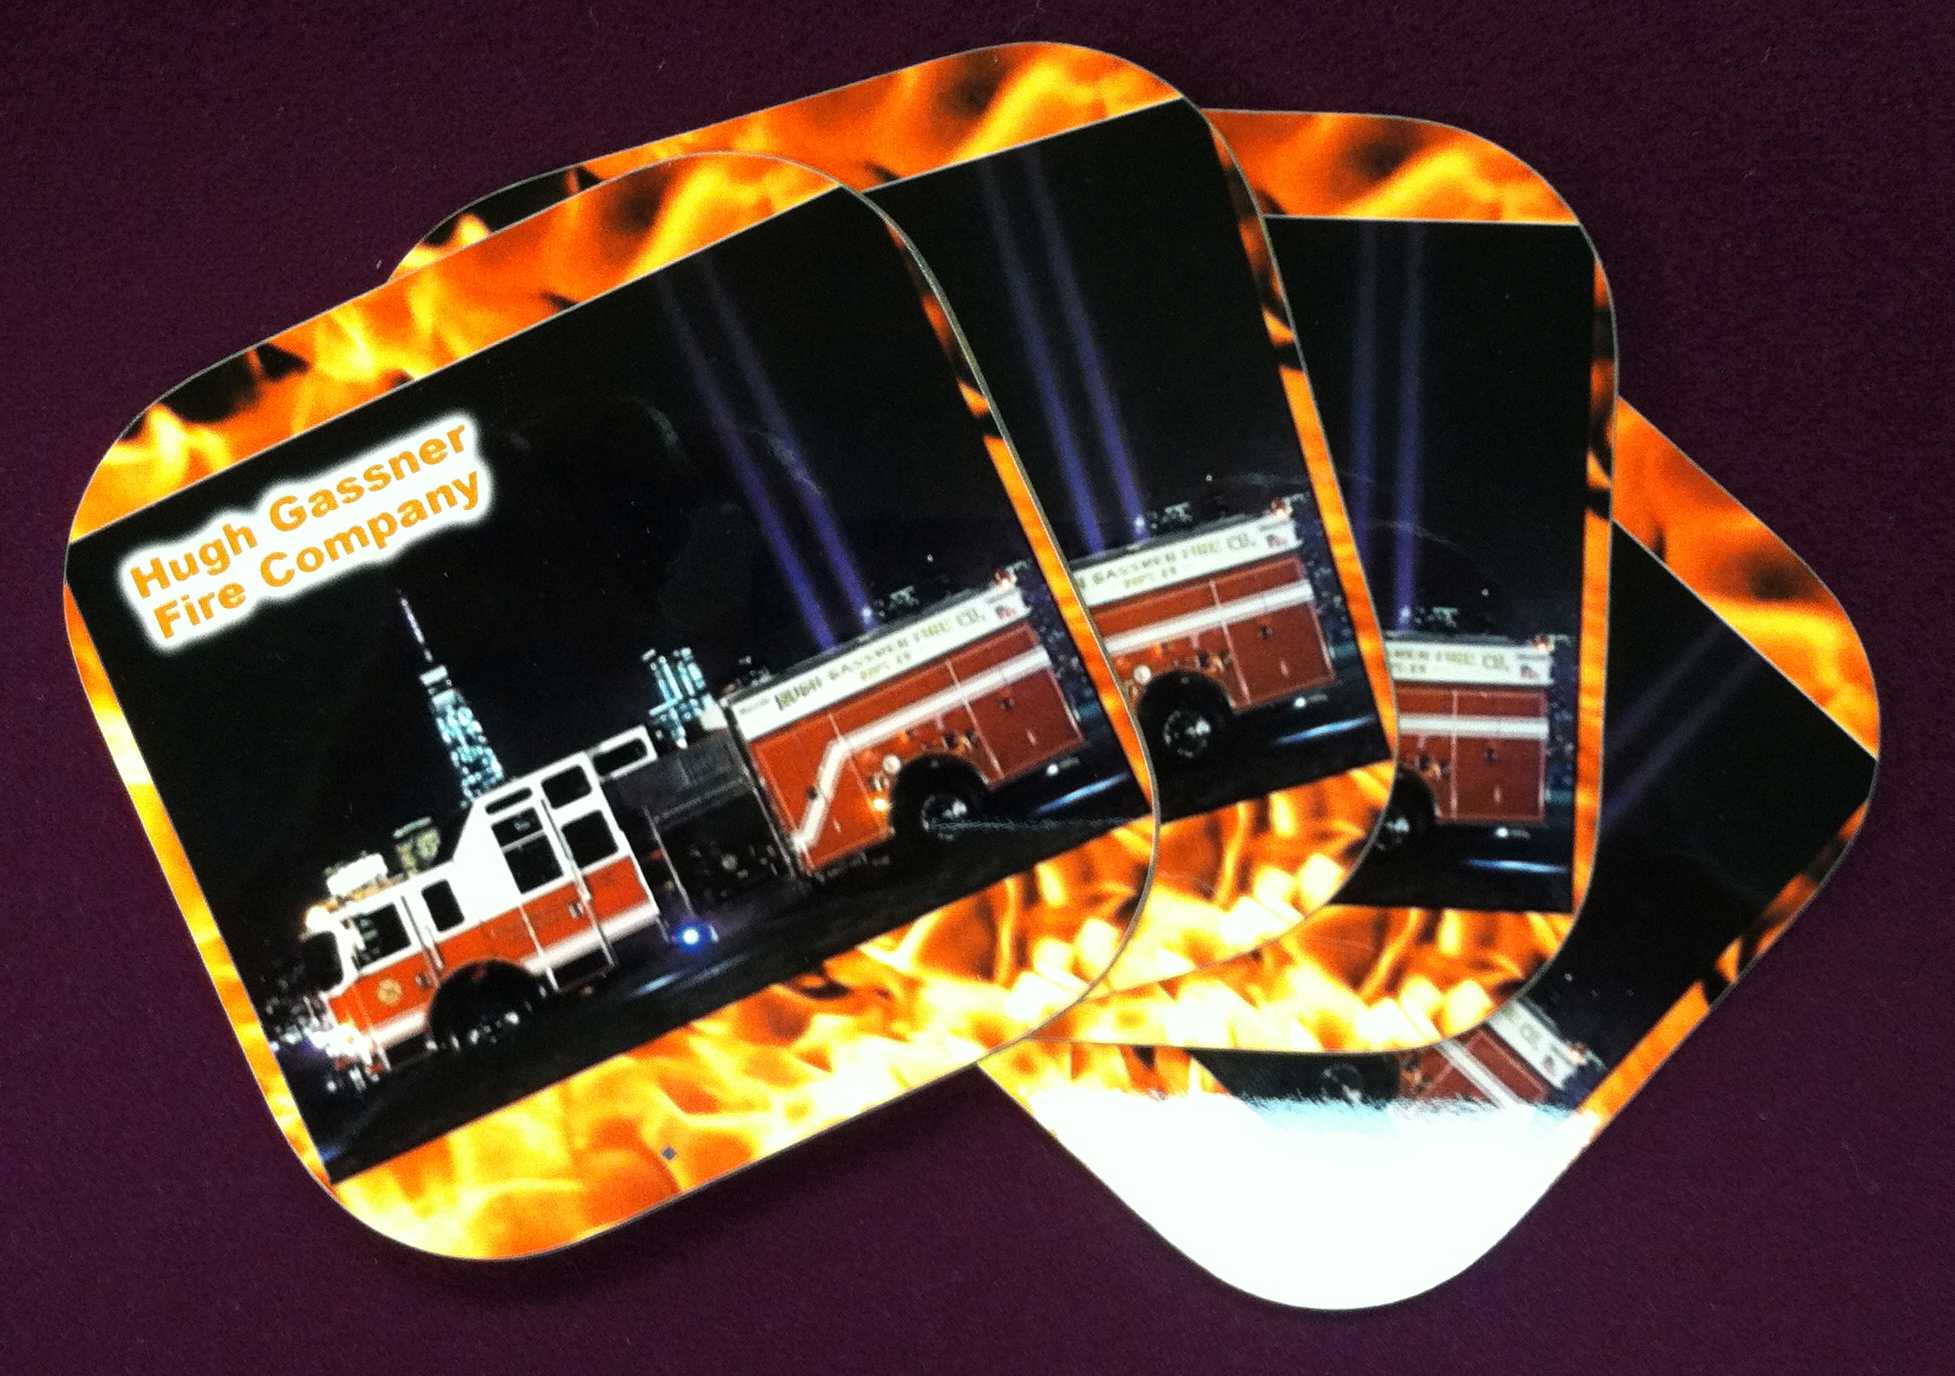 Hugh Gassner Fire Company Coasters made with sublimation printing